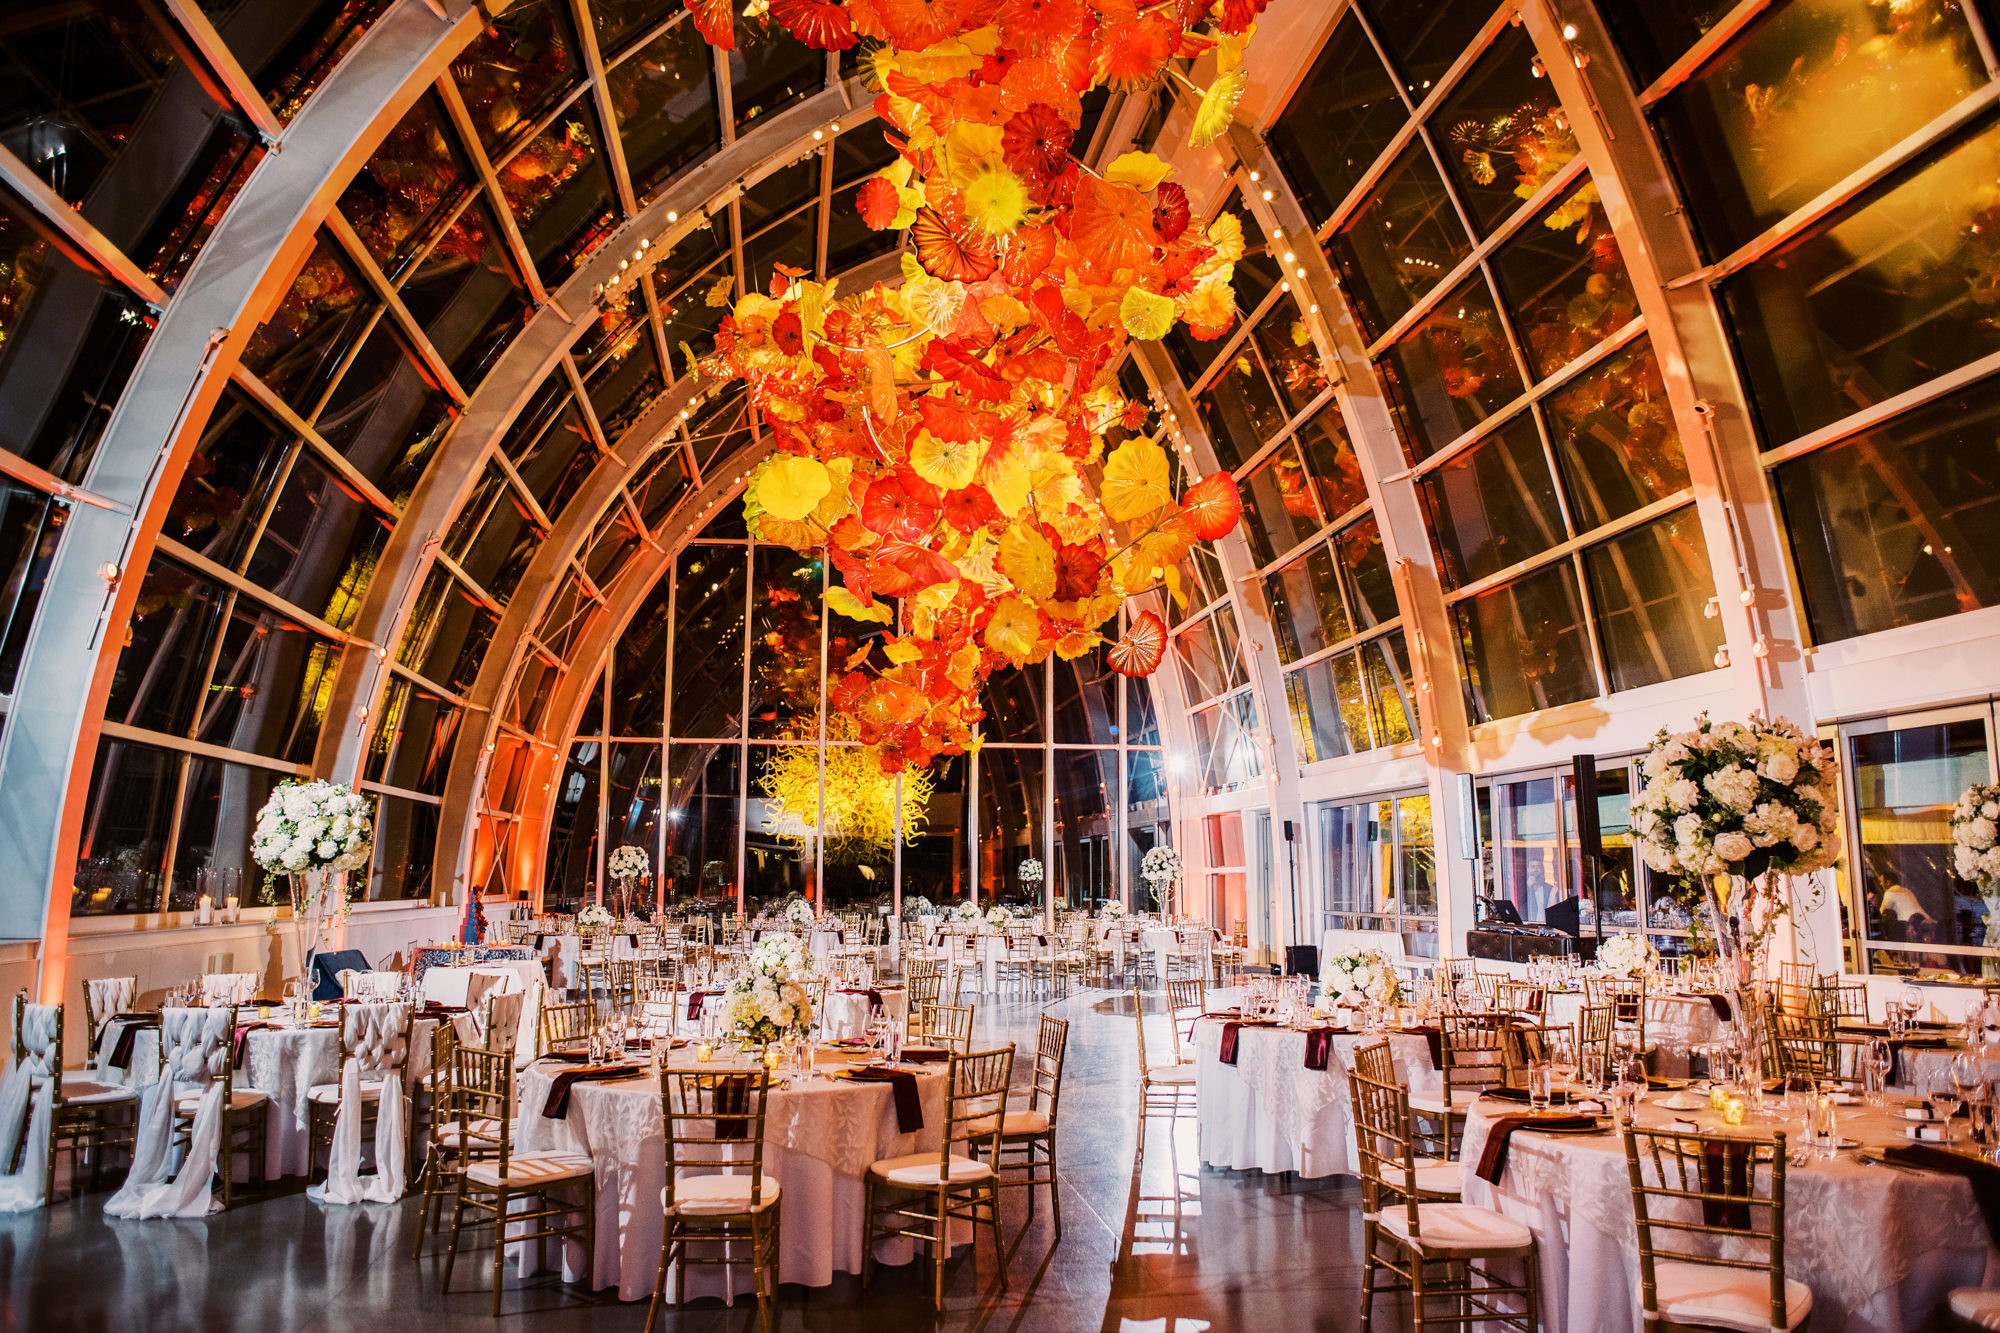 Lauren and Kyle's wedding reception at the Chihuly Garden & Glass